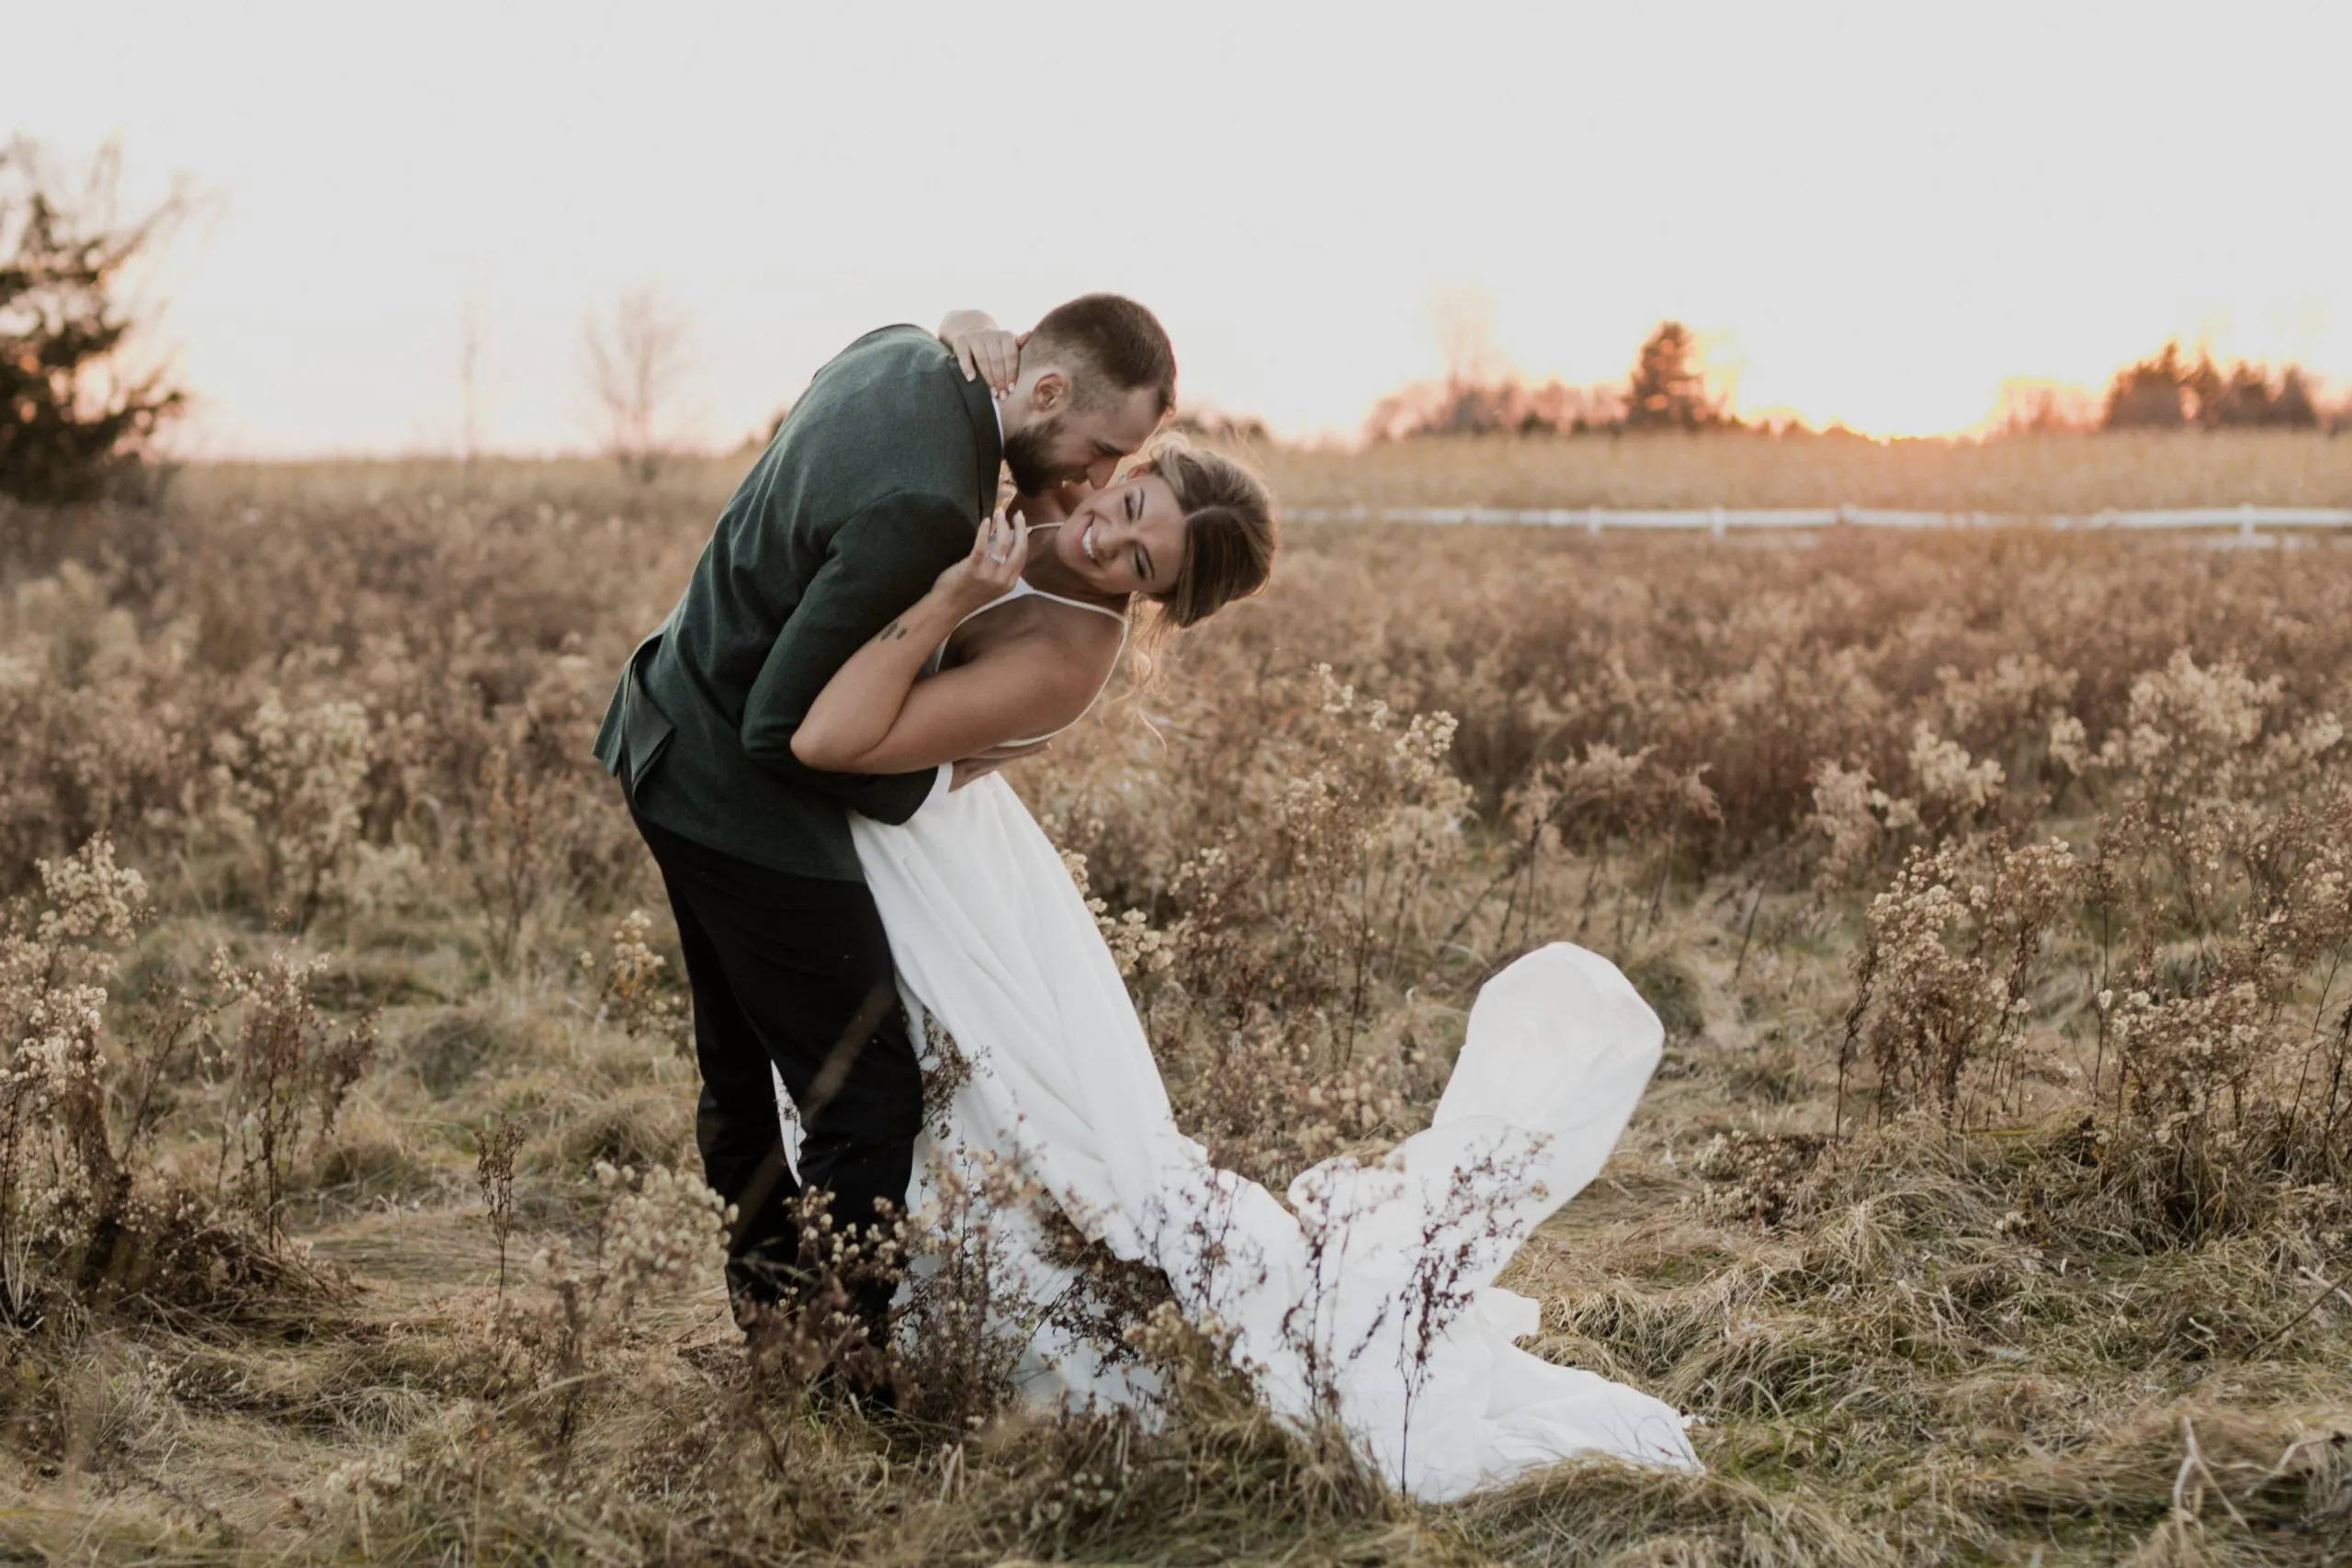 Couple hugging in field wearing a suit and wedding dress